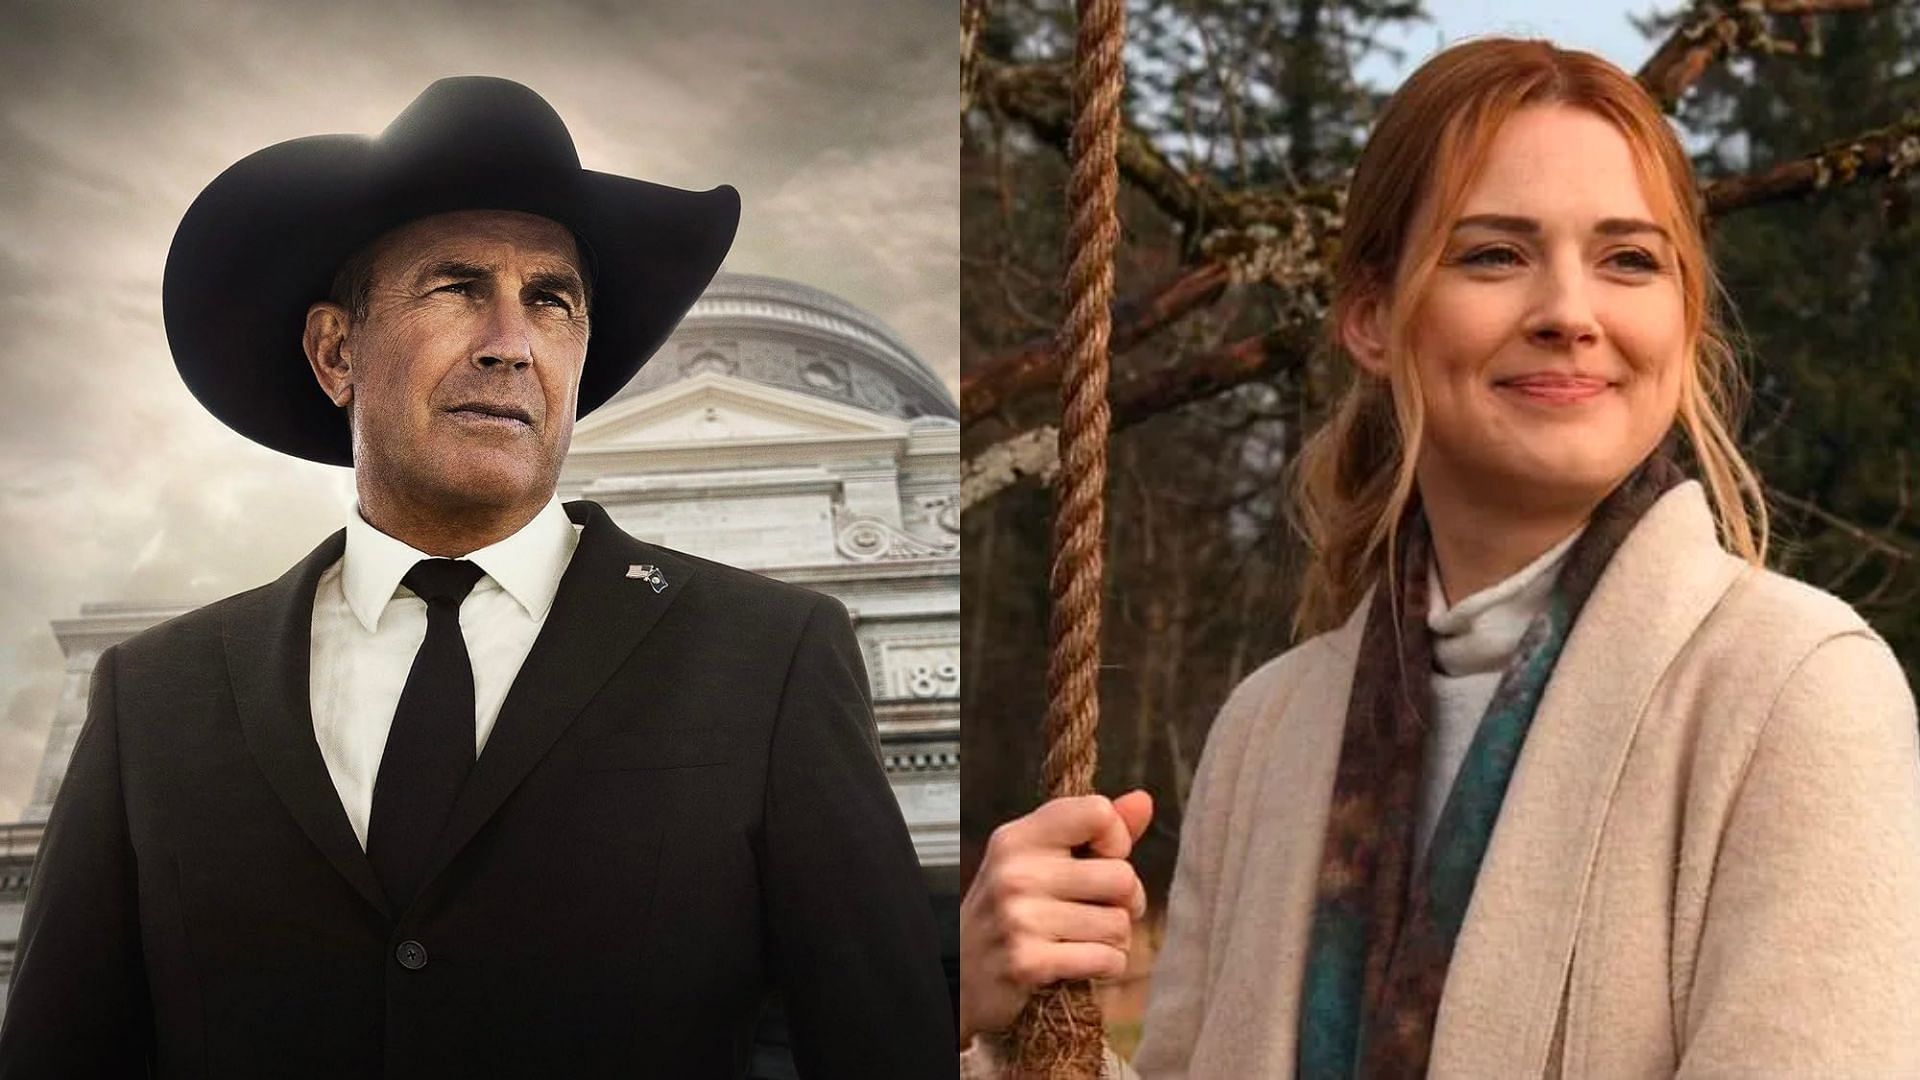 The new show combines the vibes of (L) Yellowstone and (R) Virgin River (Image via IMDb)